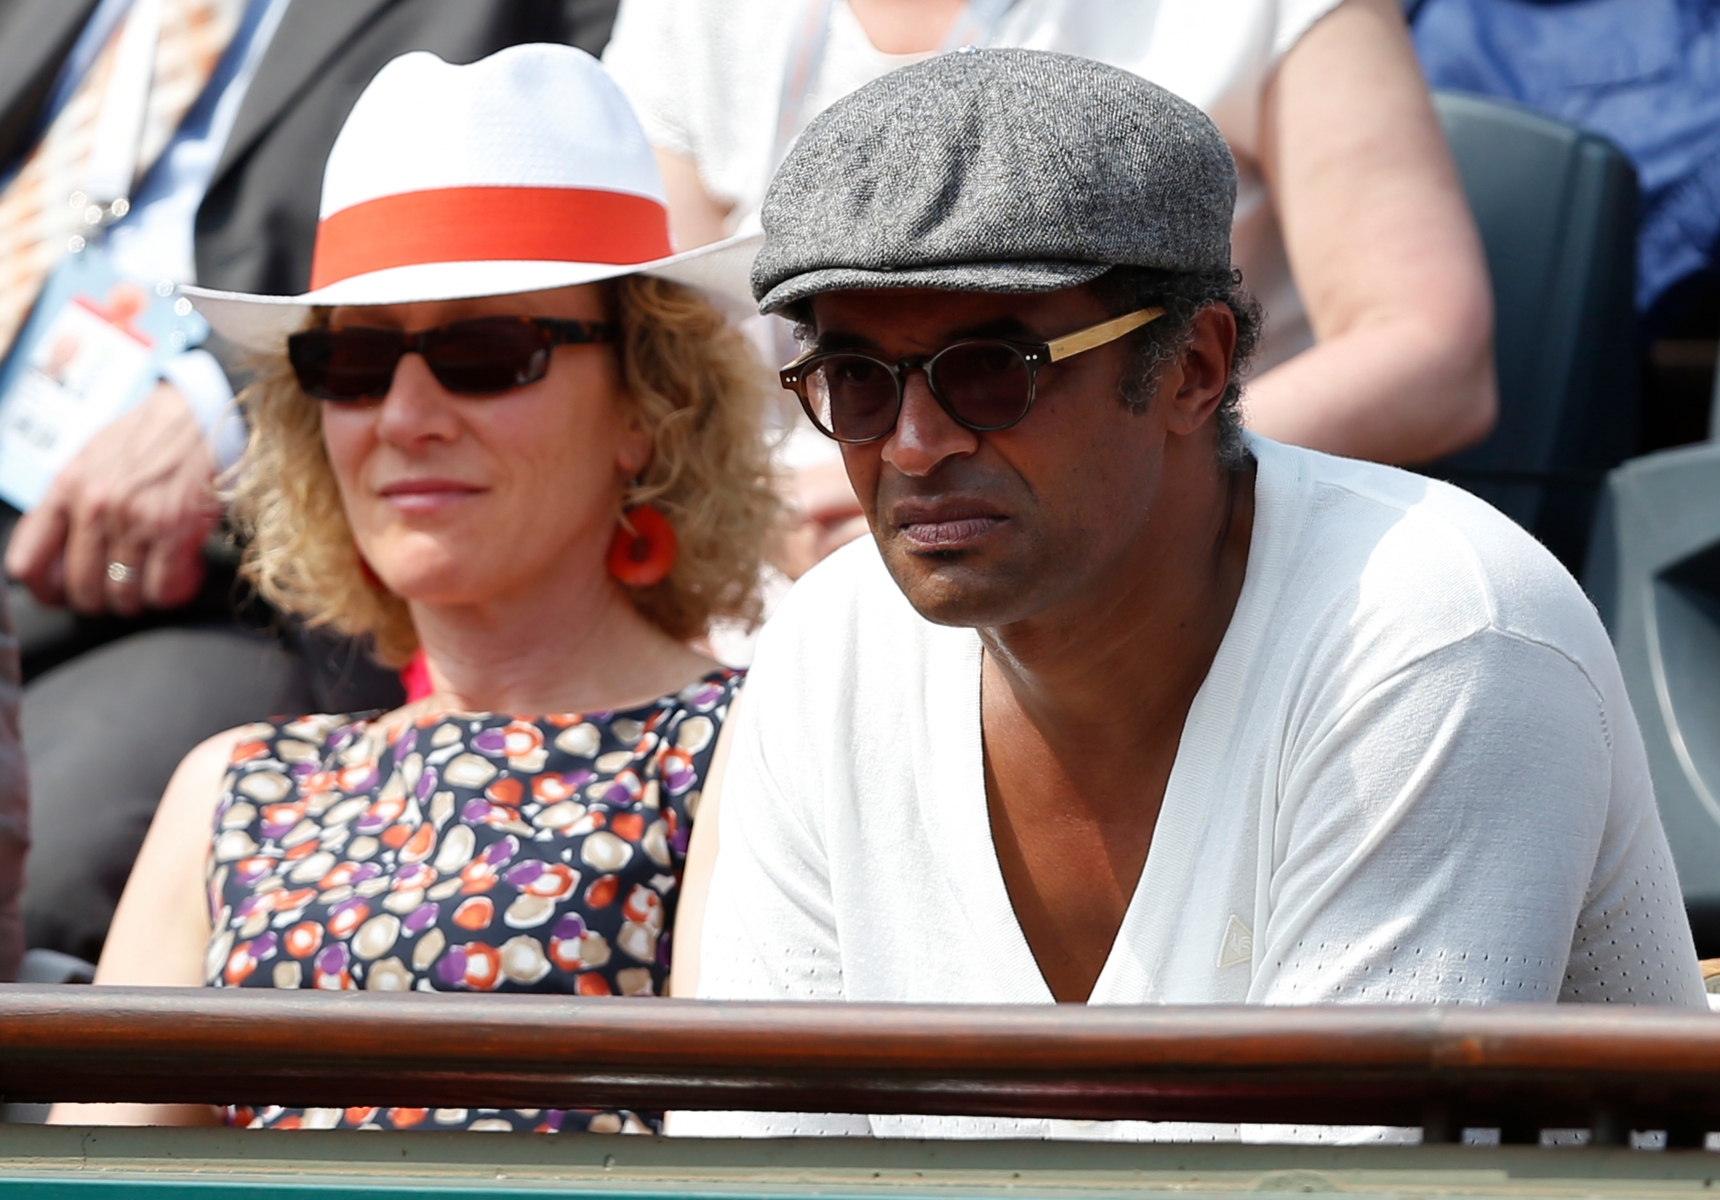 Former Roland Garros winner and musician Yannick Noah watches Russia's Maria Sharapova defeat Serbia's Jelena Jankovic in three sets 0-6, 6-4, 6-3, in their quarterfinal match at the French Open tennis tournament, at Roland Garros stadium in Paris, Wednesday June 5, 2013. (AP Photo/Petr David Josek)d TENNIS FRENCH OPEN 2013